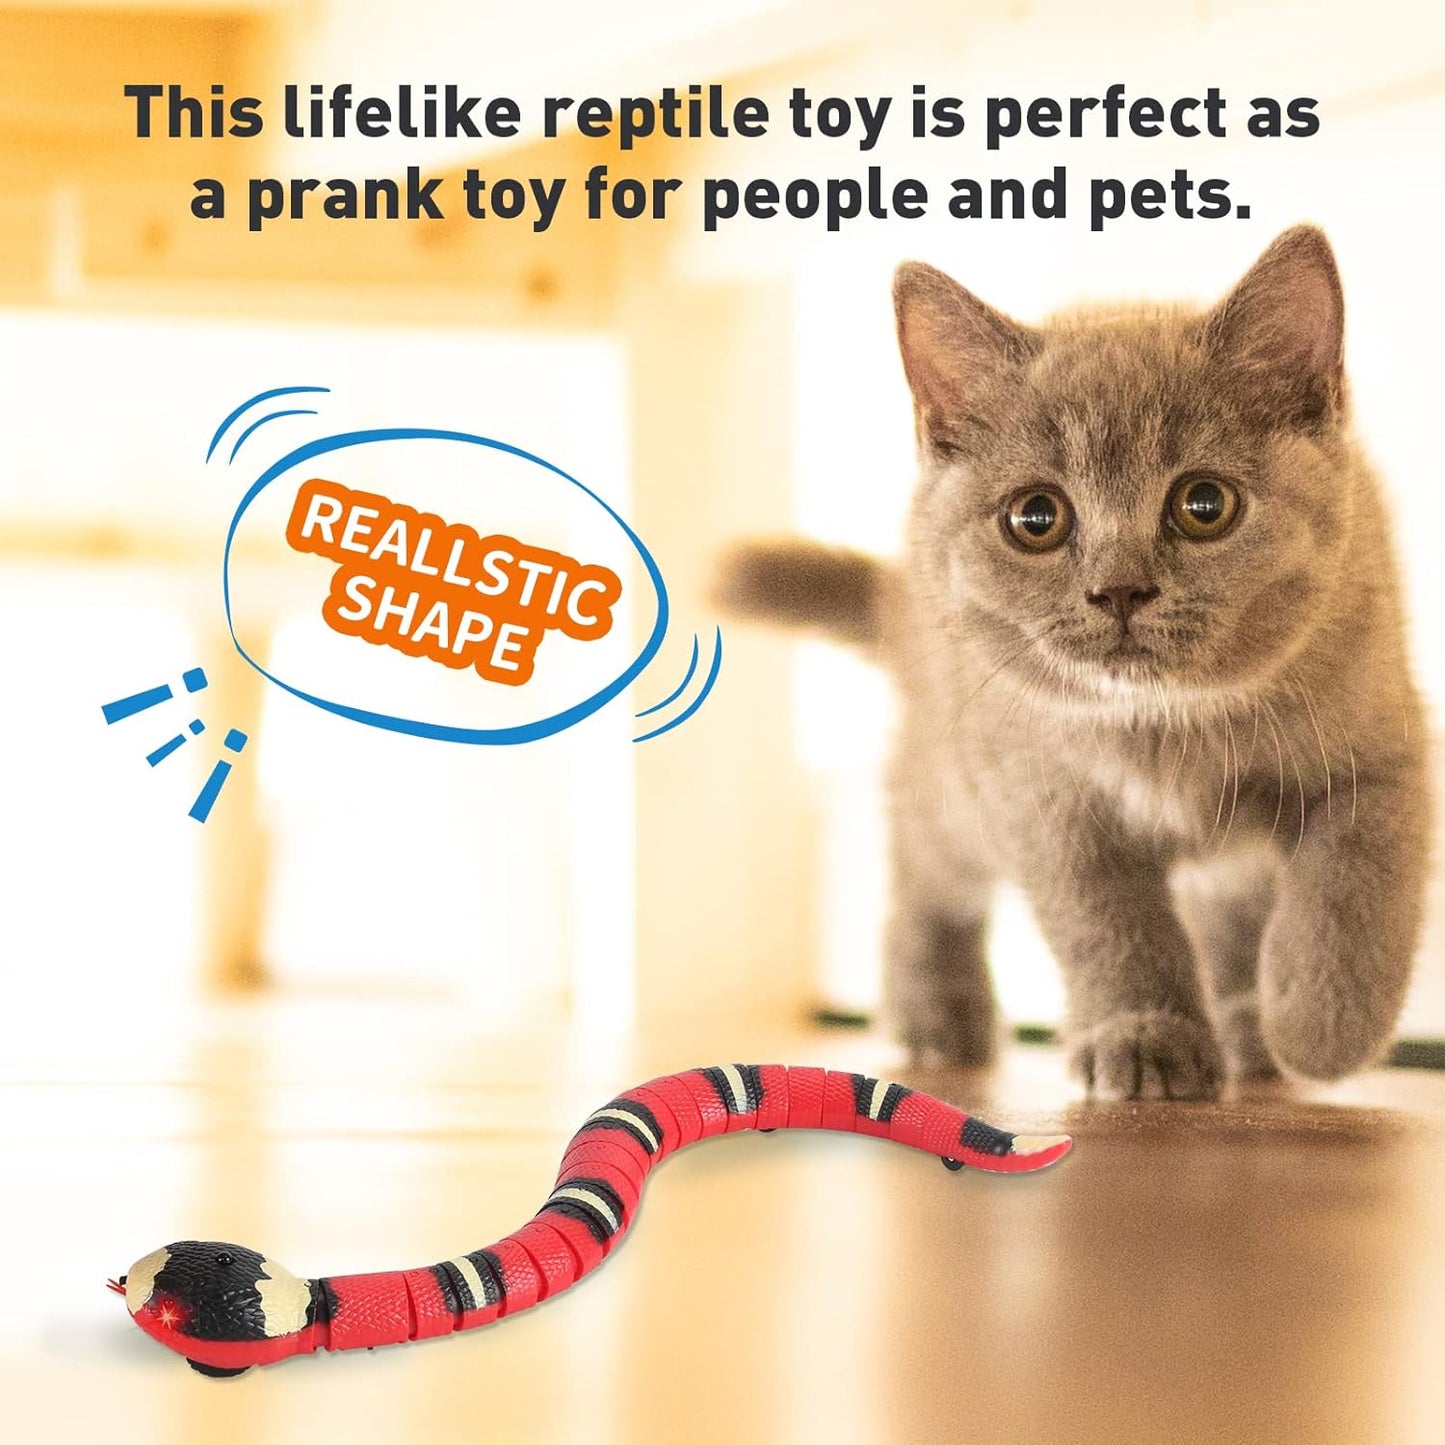 Infrared Induction RC Snake Toy for Kids Pet Toy USB Rechargeable Indoor and Outdoor Prank Toys for Cat Dog Kids' Electronics Halloween Decorations for Boys Girls